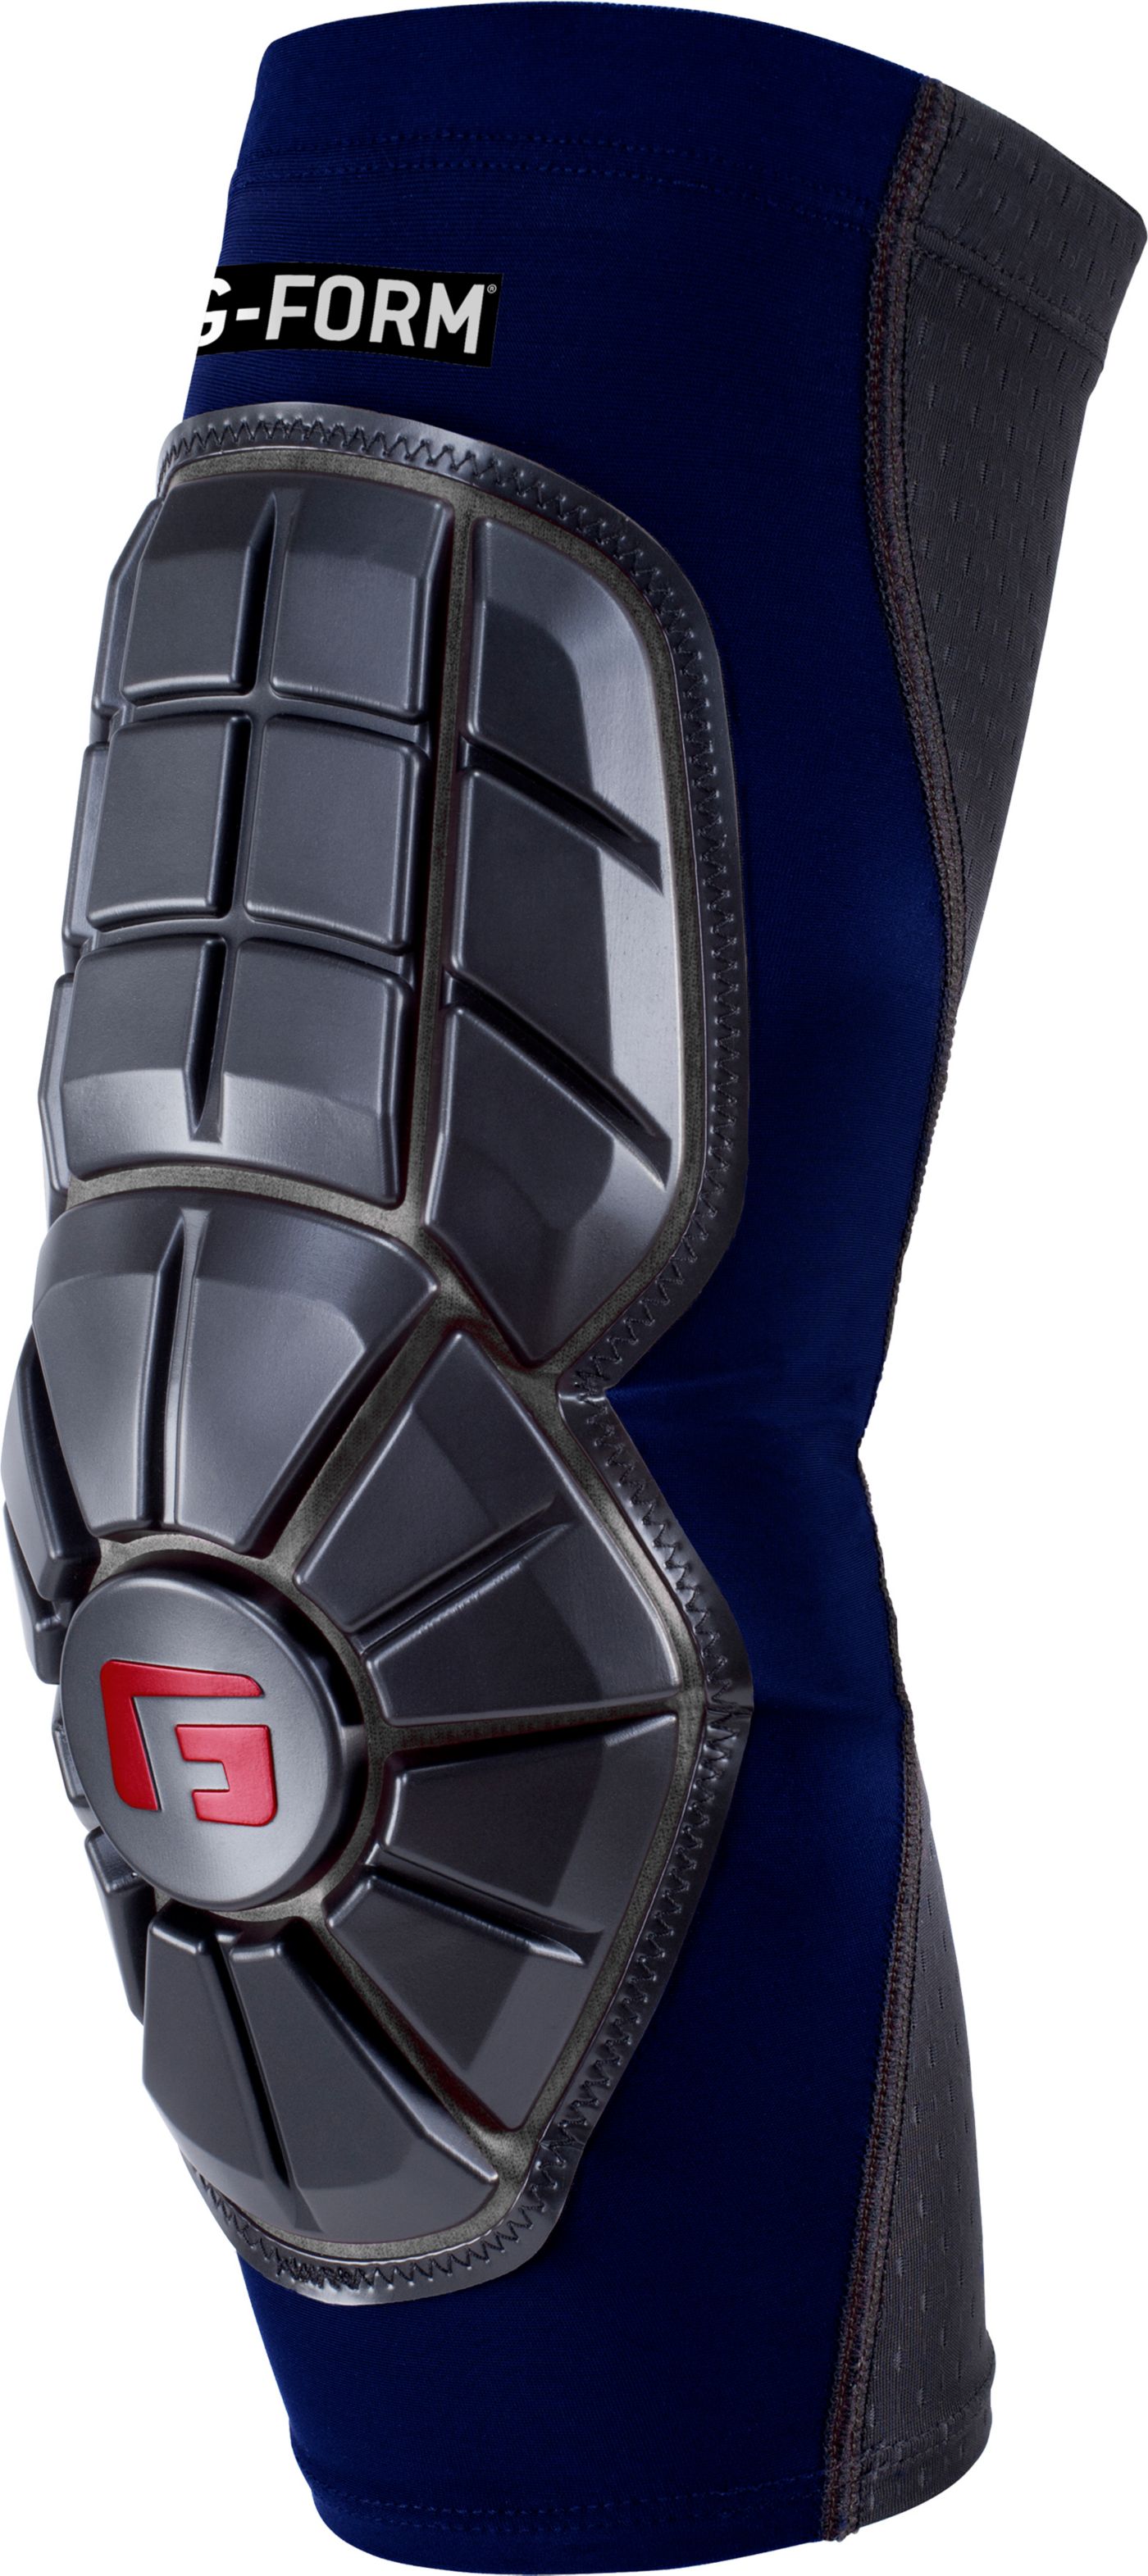 g-form-adult-extended-elbow-pad-dick-s-sporting-goods